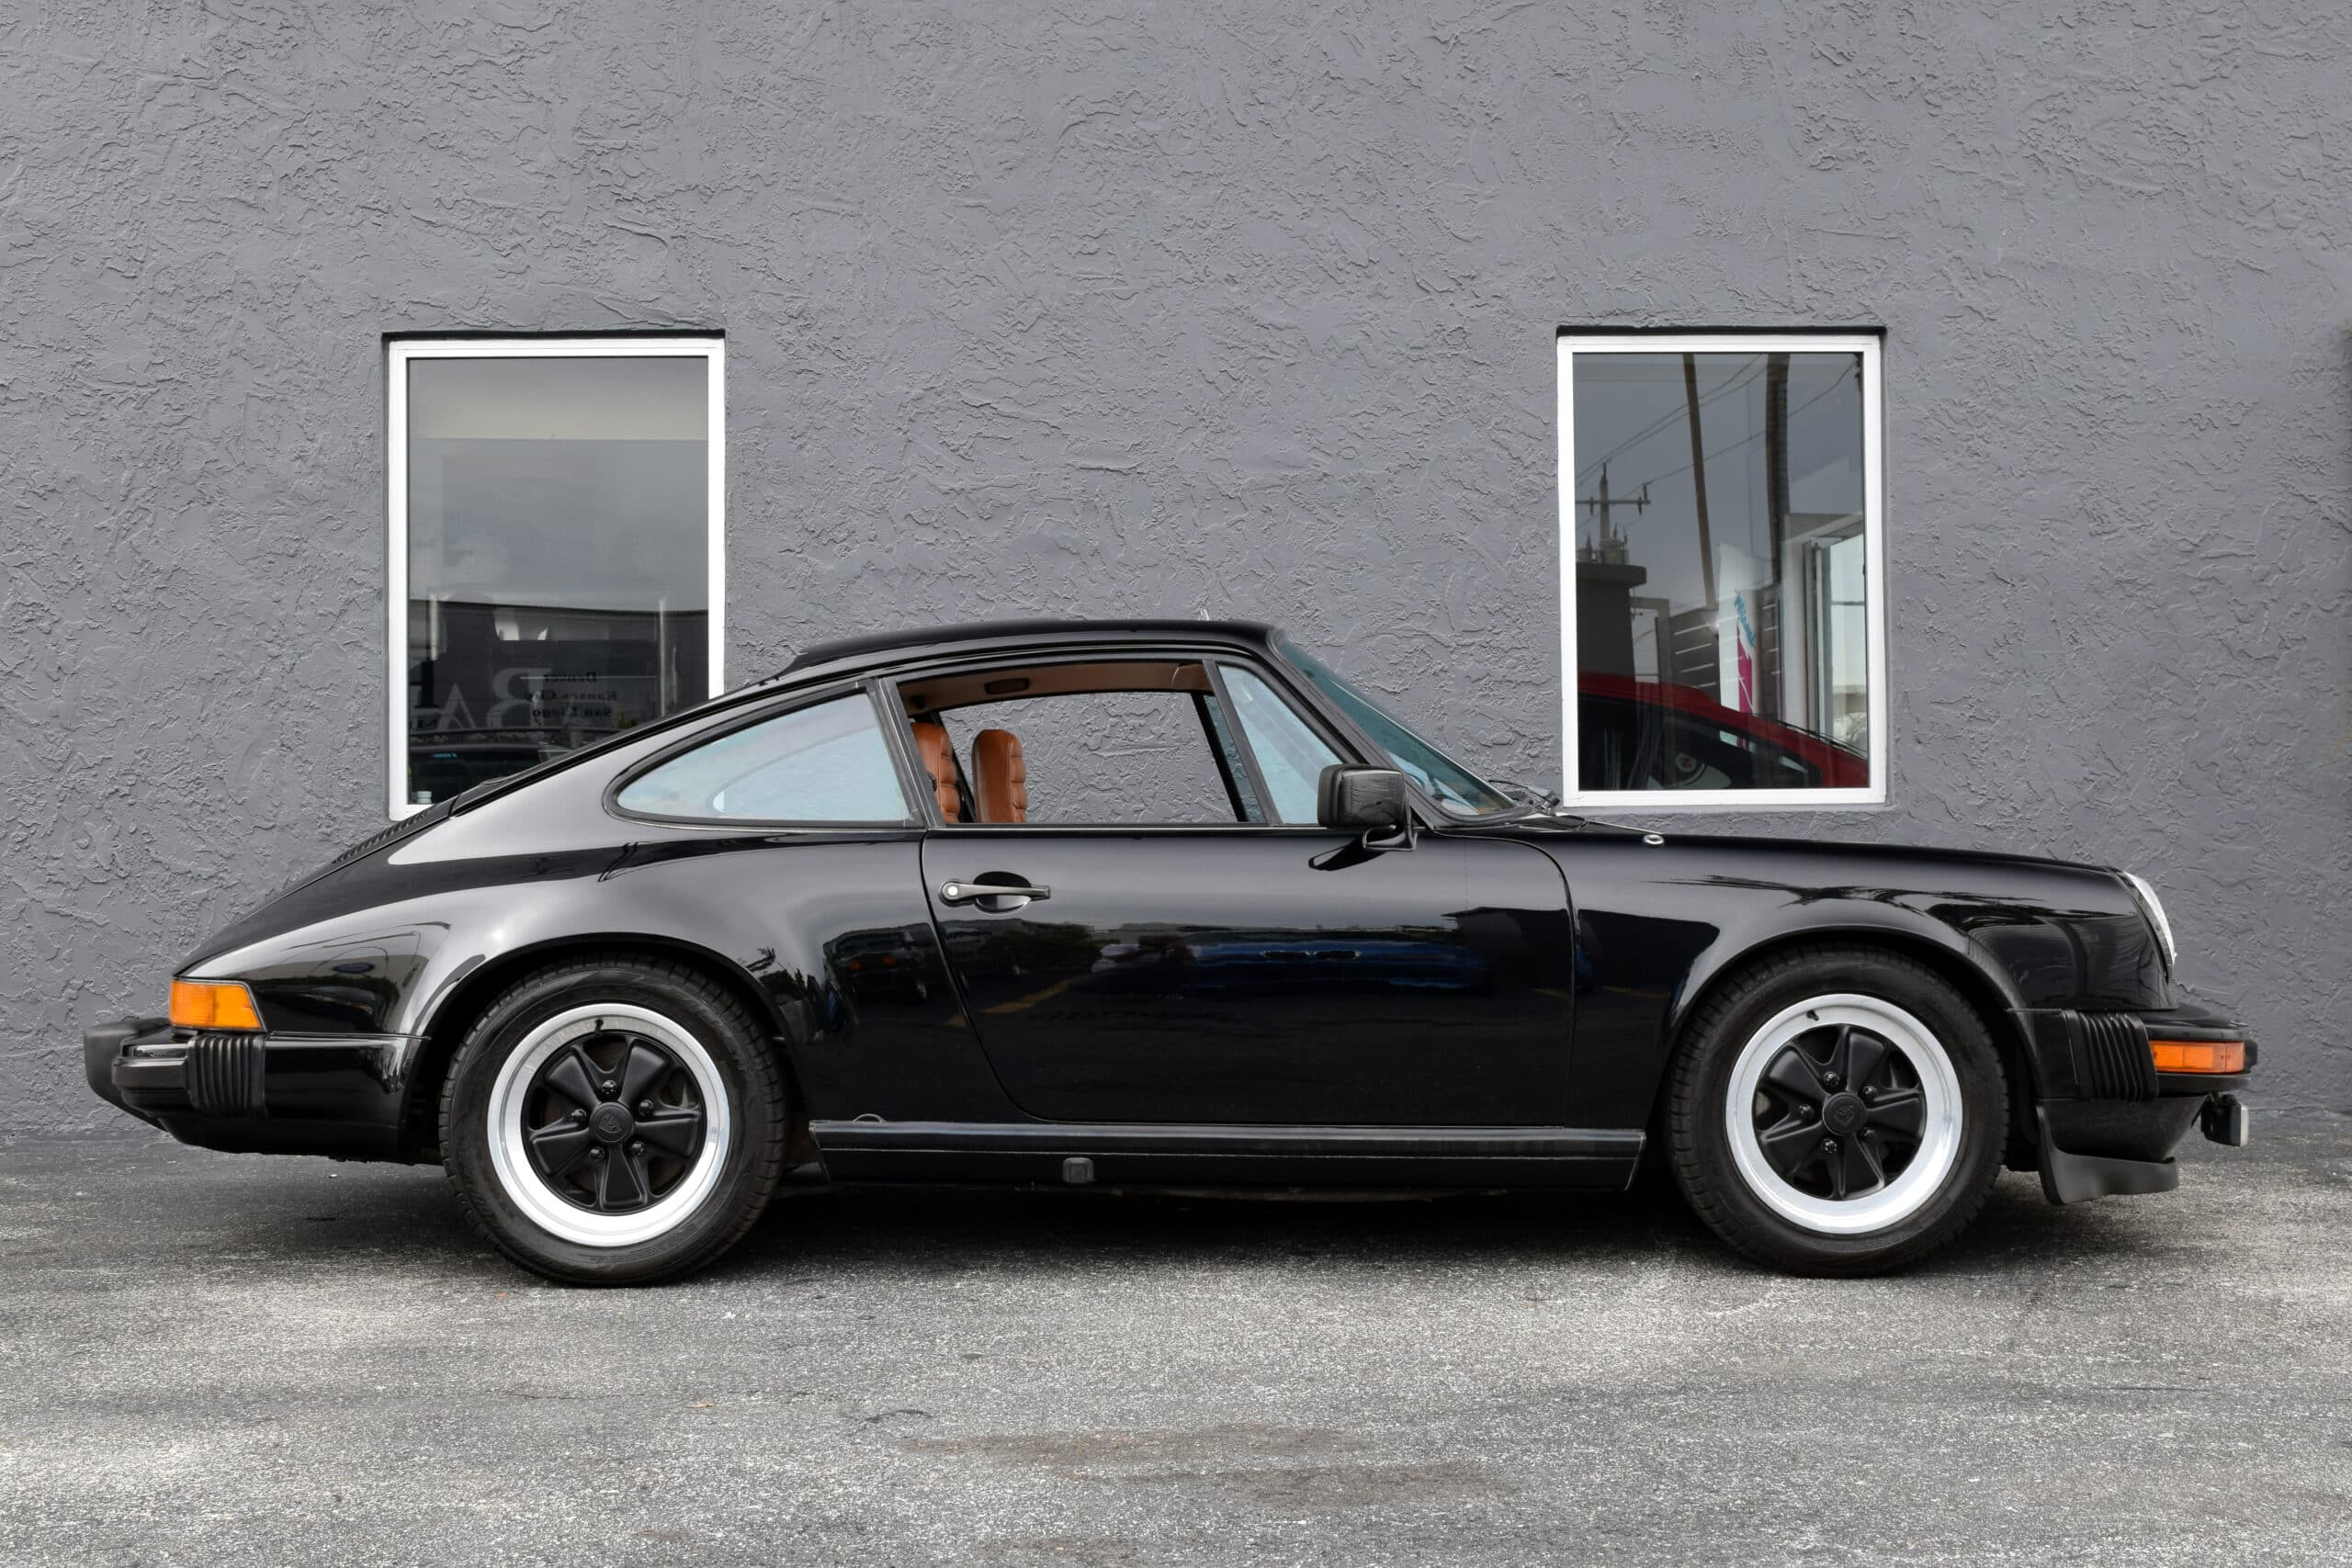 1983 Porsche 911 911 SC One owner for most of its life, Black California Customs Plates, CA Smog valid